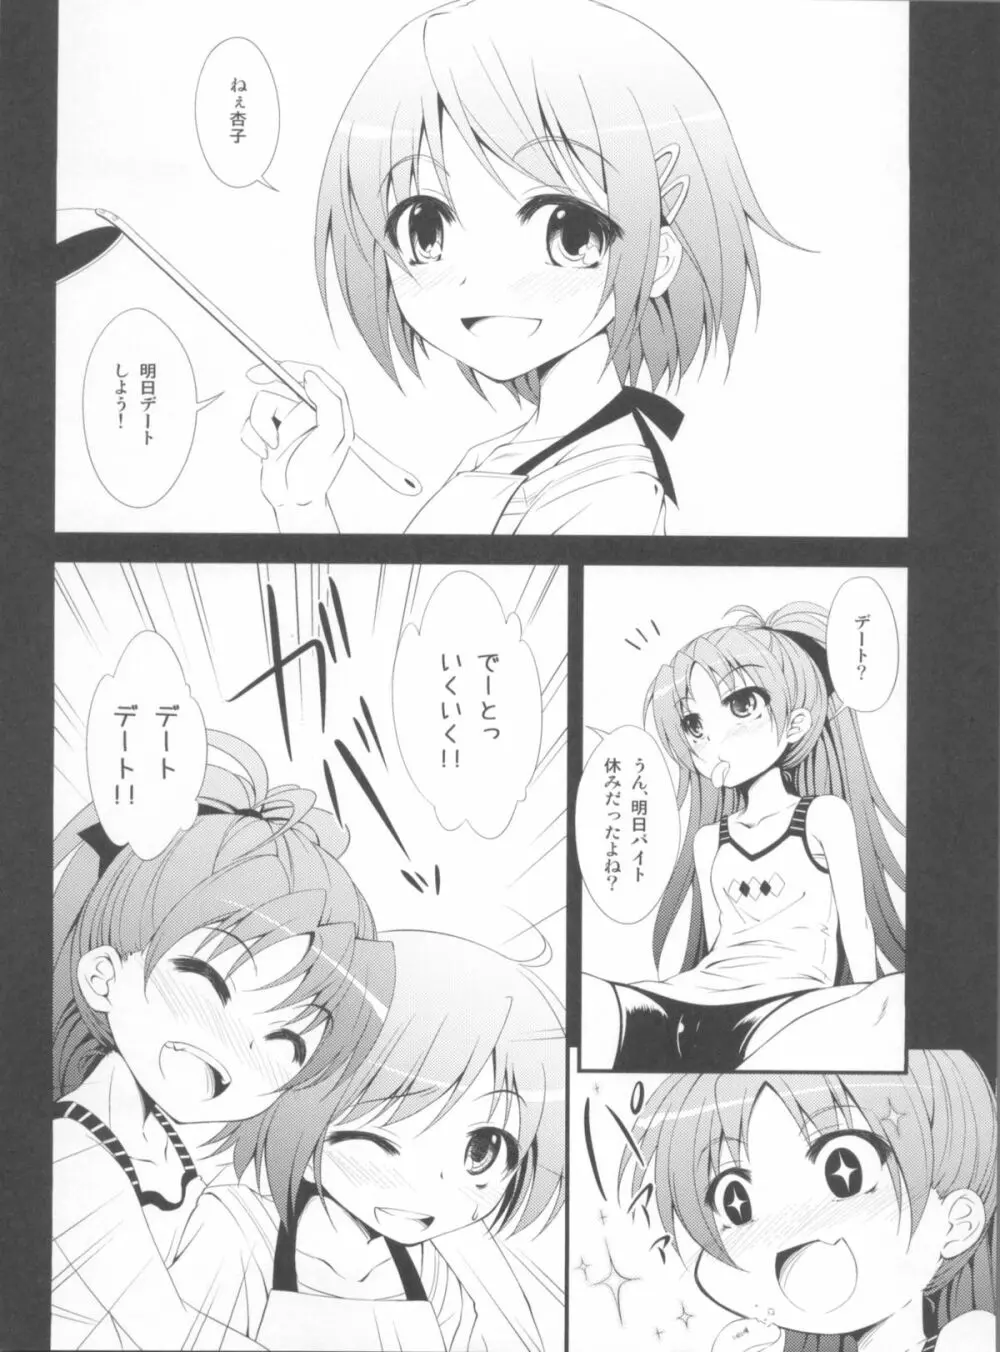 Lovely Girls' Lily vol.2 - page3